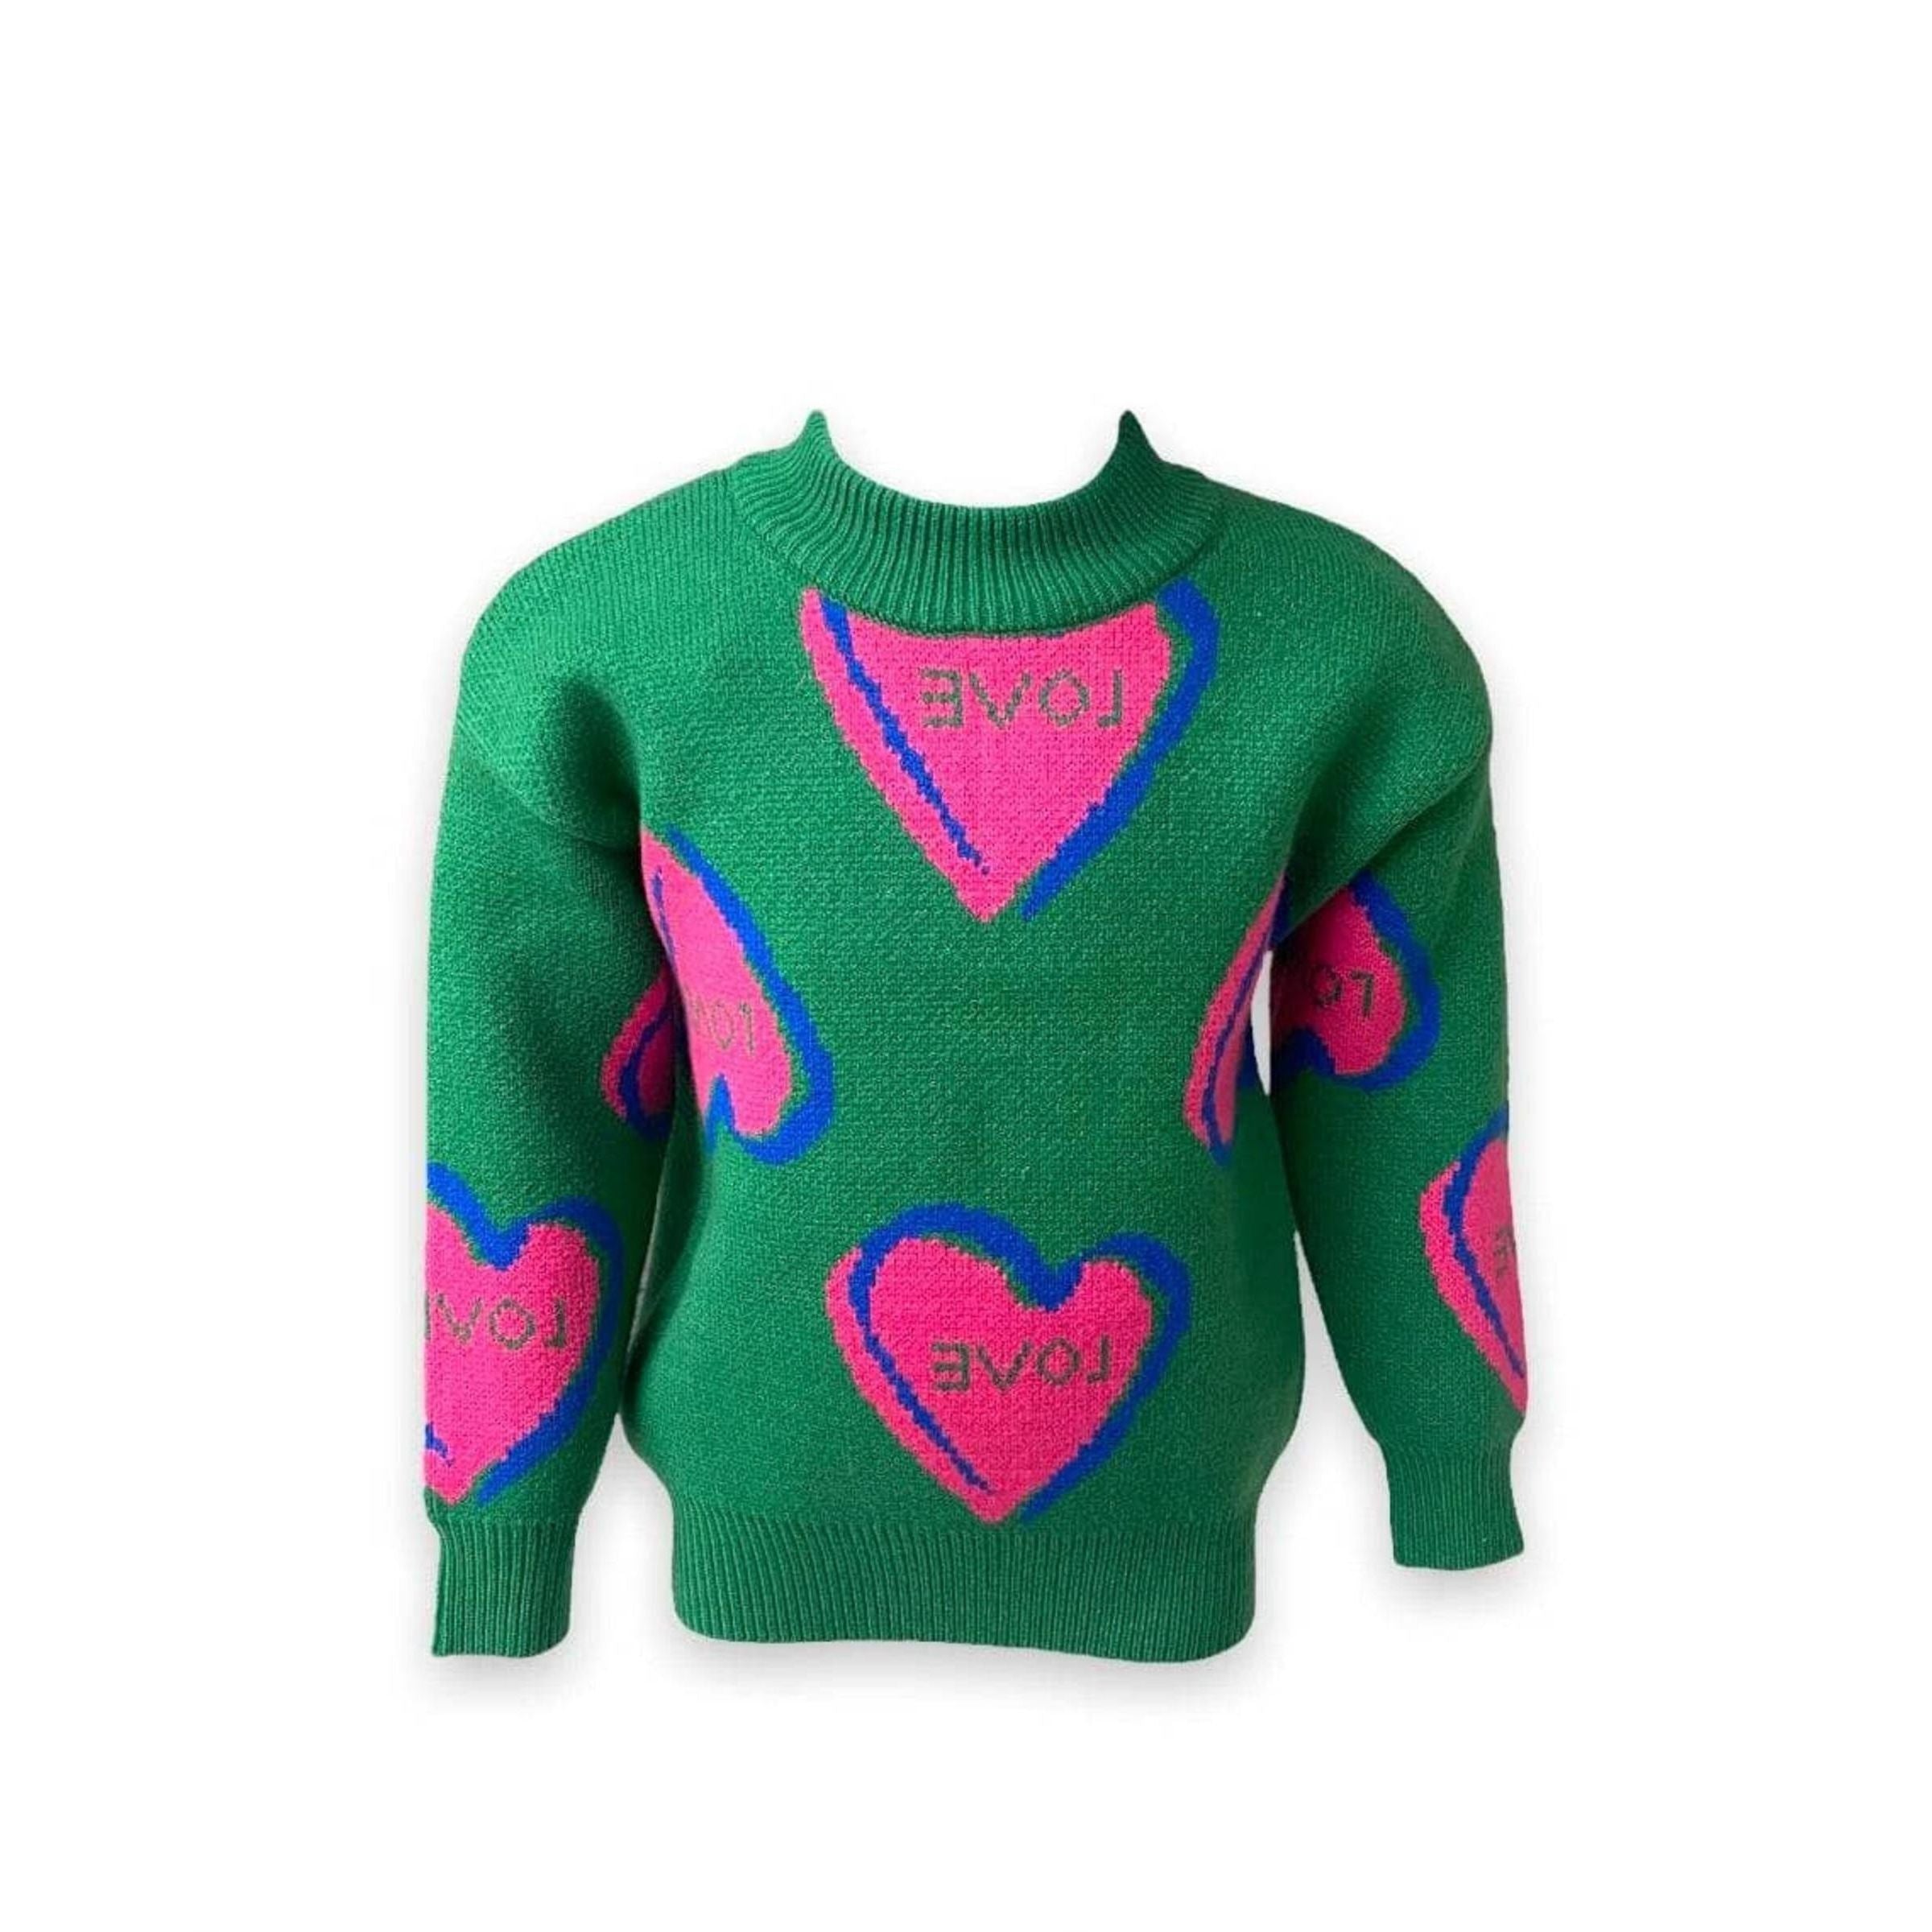 green long sleeve sweater with knit pink and blue hearts with "love" printed inside